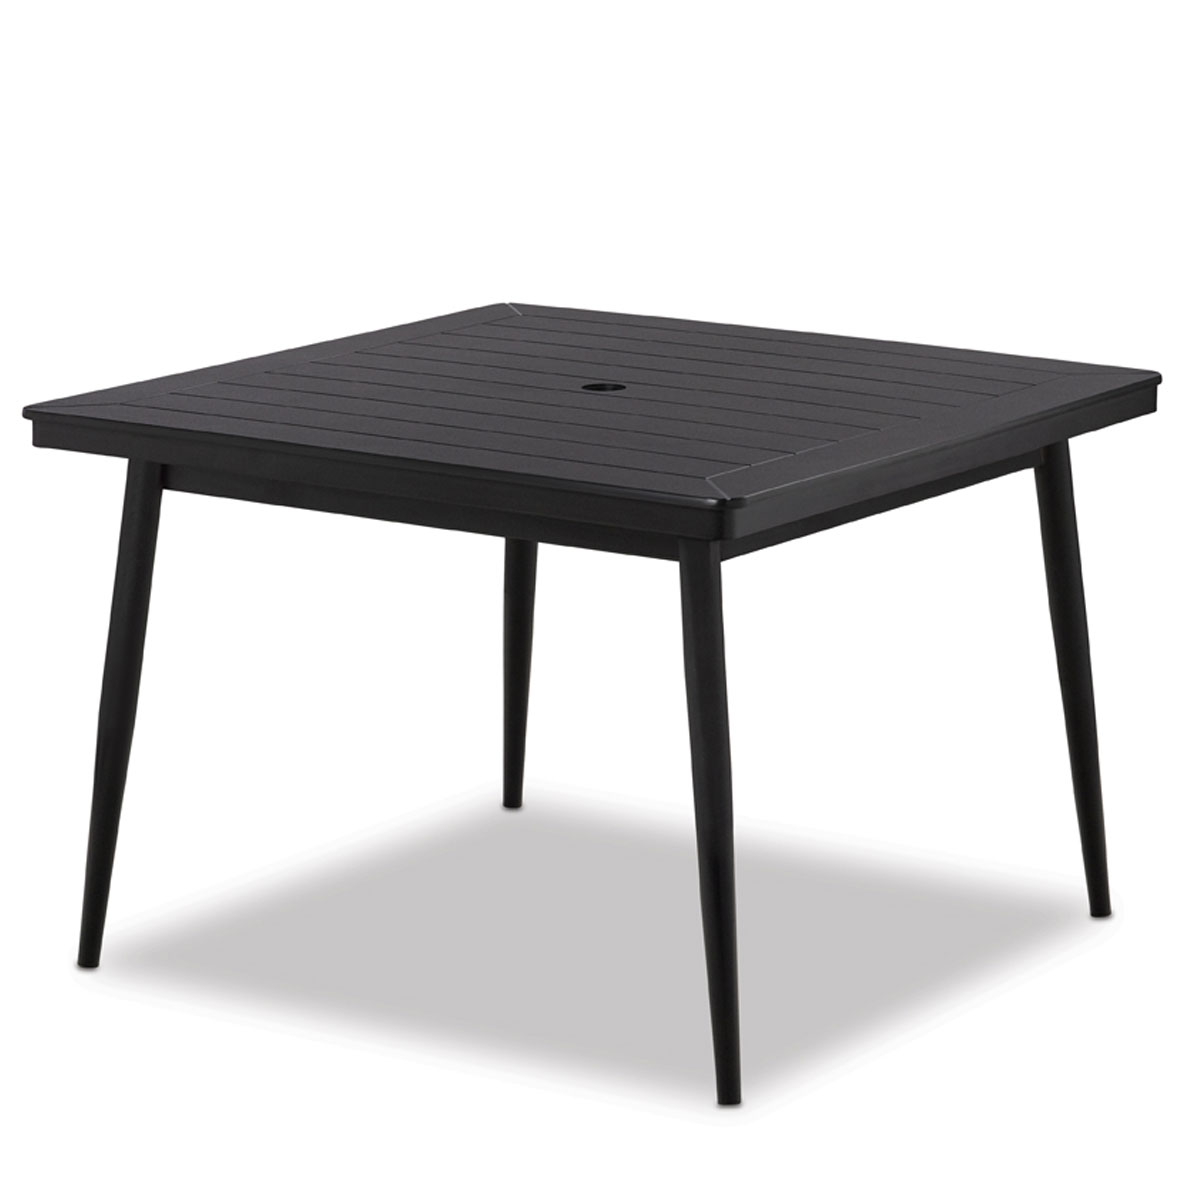 42" Square Dining Height Table with Tapered Legs